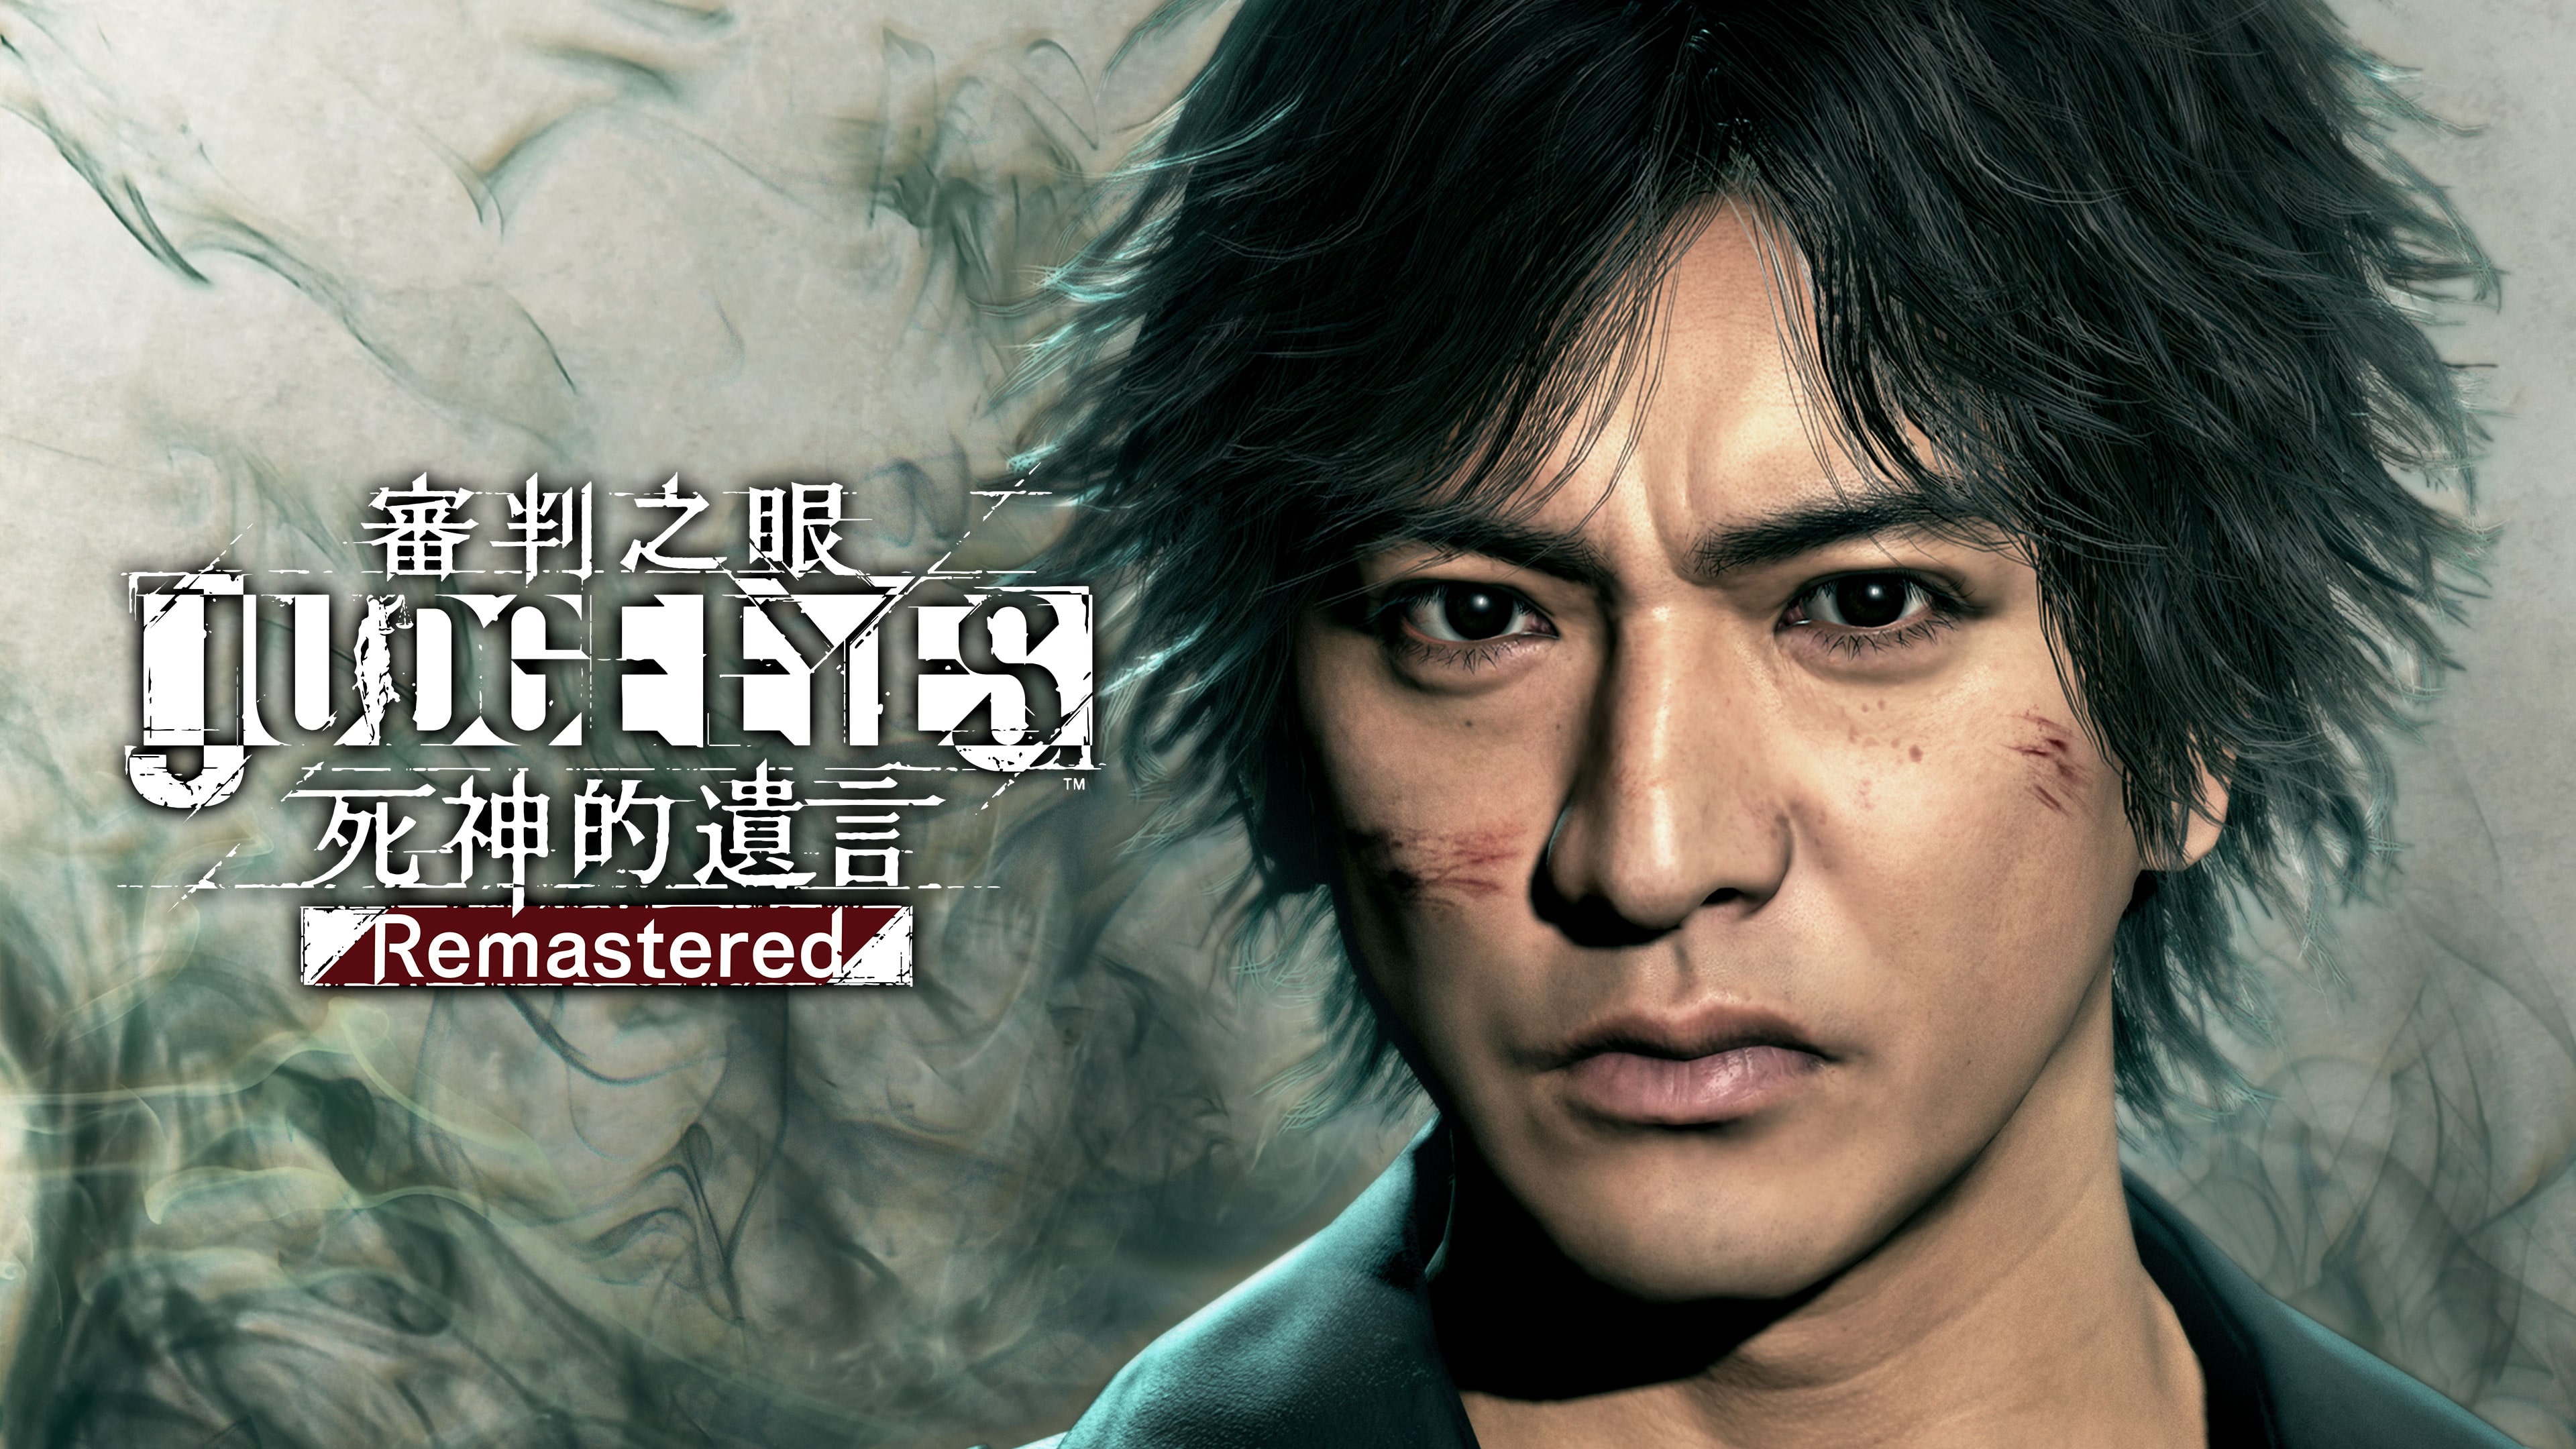 JUDGE EYES: wills of death Remastered (Simplified Chinese, English, Korean, Japanese, Traditional Chinese)